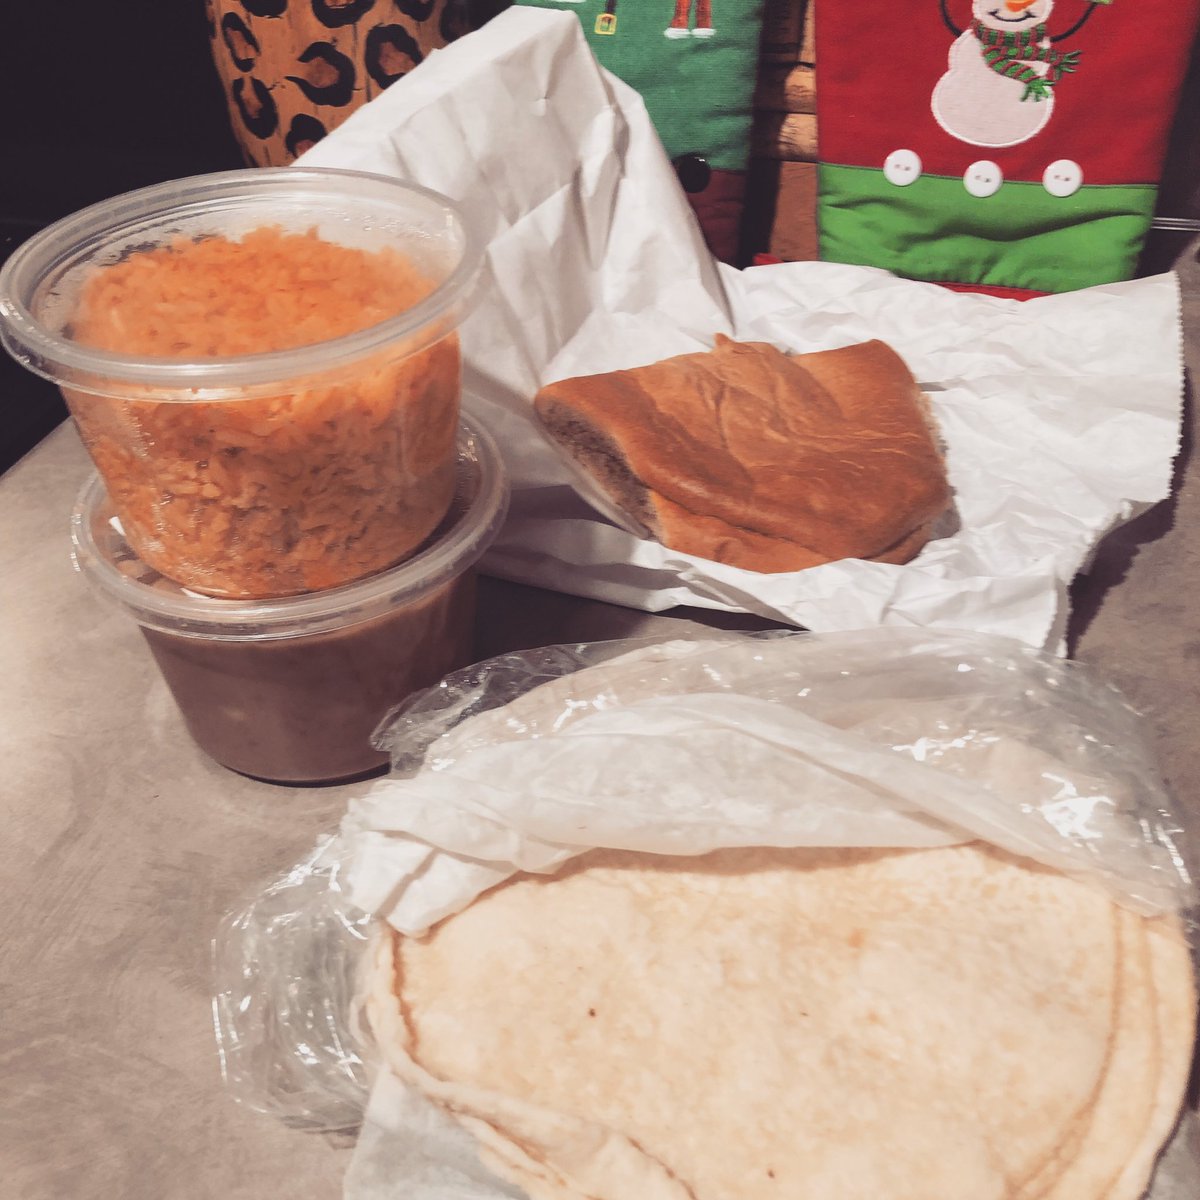 Does your dad even know what your favorite empanada filling is?! Mine does!! 🙋🏻‍♂️ Nothing says “Best Dad Ever” than being surprised with the best rice, beans, fresh STILL WARM tortillas & your favorite pan dulce. ❤️🎄🙏🏼  #gratefuldaughter #familia #empanadasdecalabaza #bestdadever